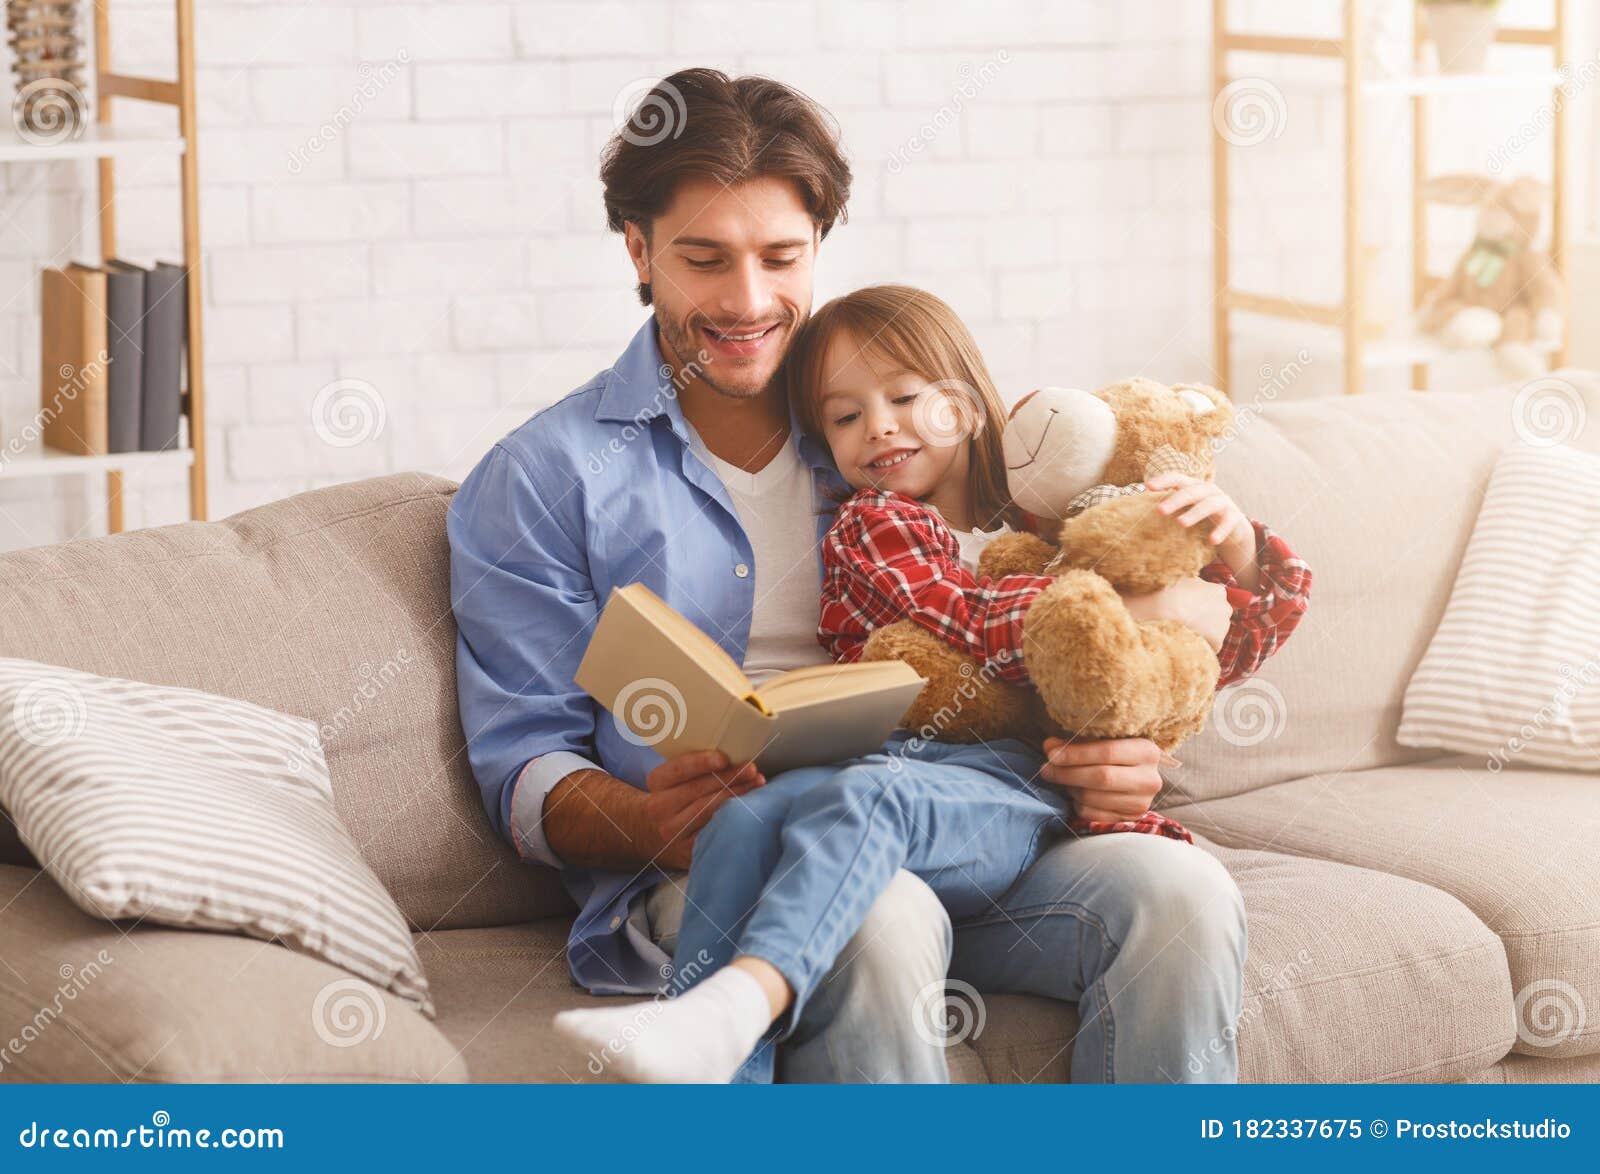 Daddy and Daughter Reading Funny Stories Together Stock Image - Image of  connection, cute: 182337675